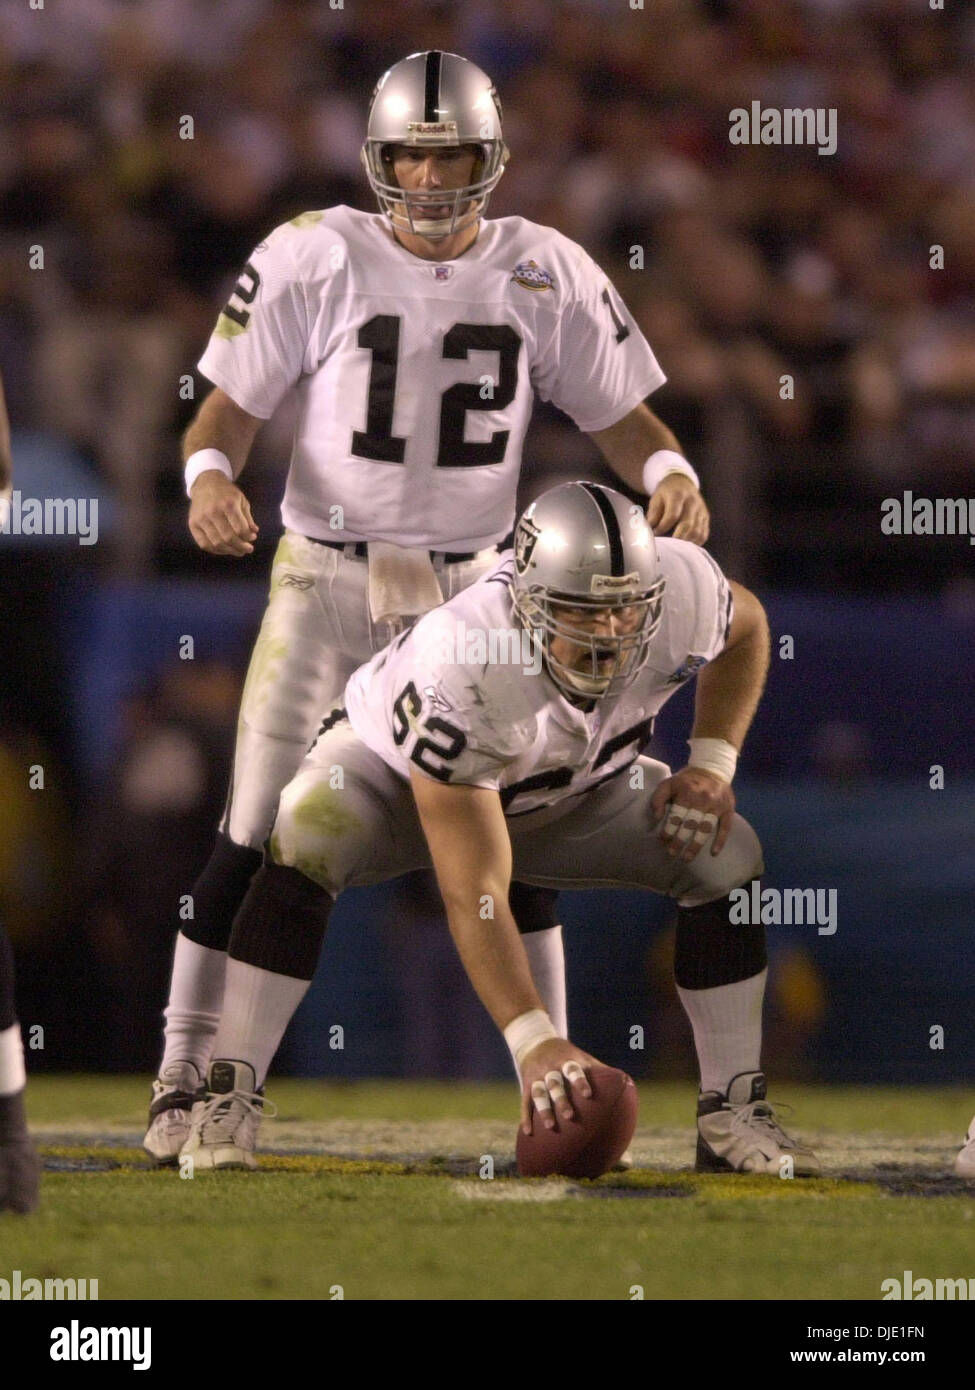 Jan 26, 2003 - San Diego, California, USA - Tampa Bay Buccaneers beat Oakland Raiders 48-21 at Super Bowl 37. Pictured: #62 Raider center ADAM TREU gets ready to snap the ball in 4th quarter action.  (Credit Image: © Jim Baird/San Diego Union-Tribune/ZUMA Press) RESTRICTIONS: LA, Orange County Papers & USA Tabloids RIGHTS OUT! Stock Photo